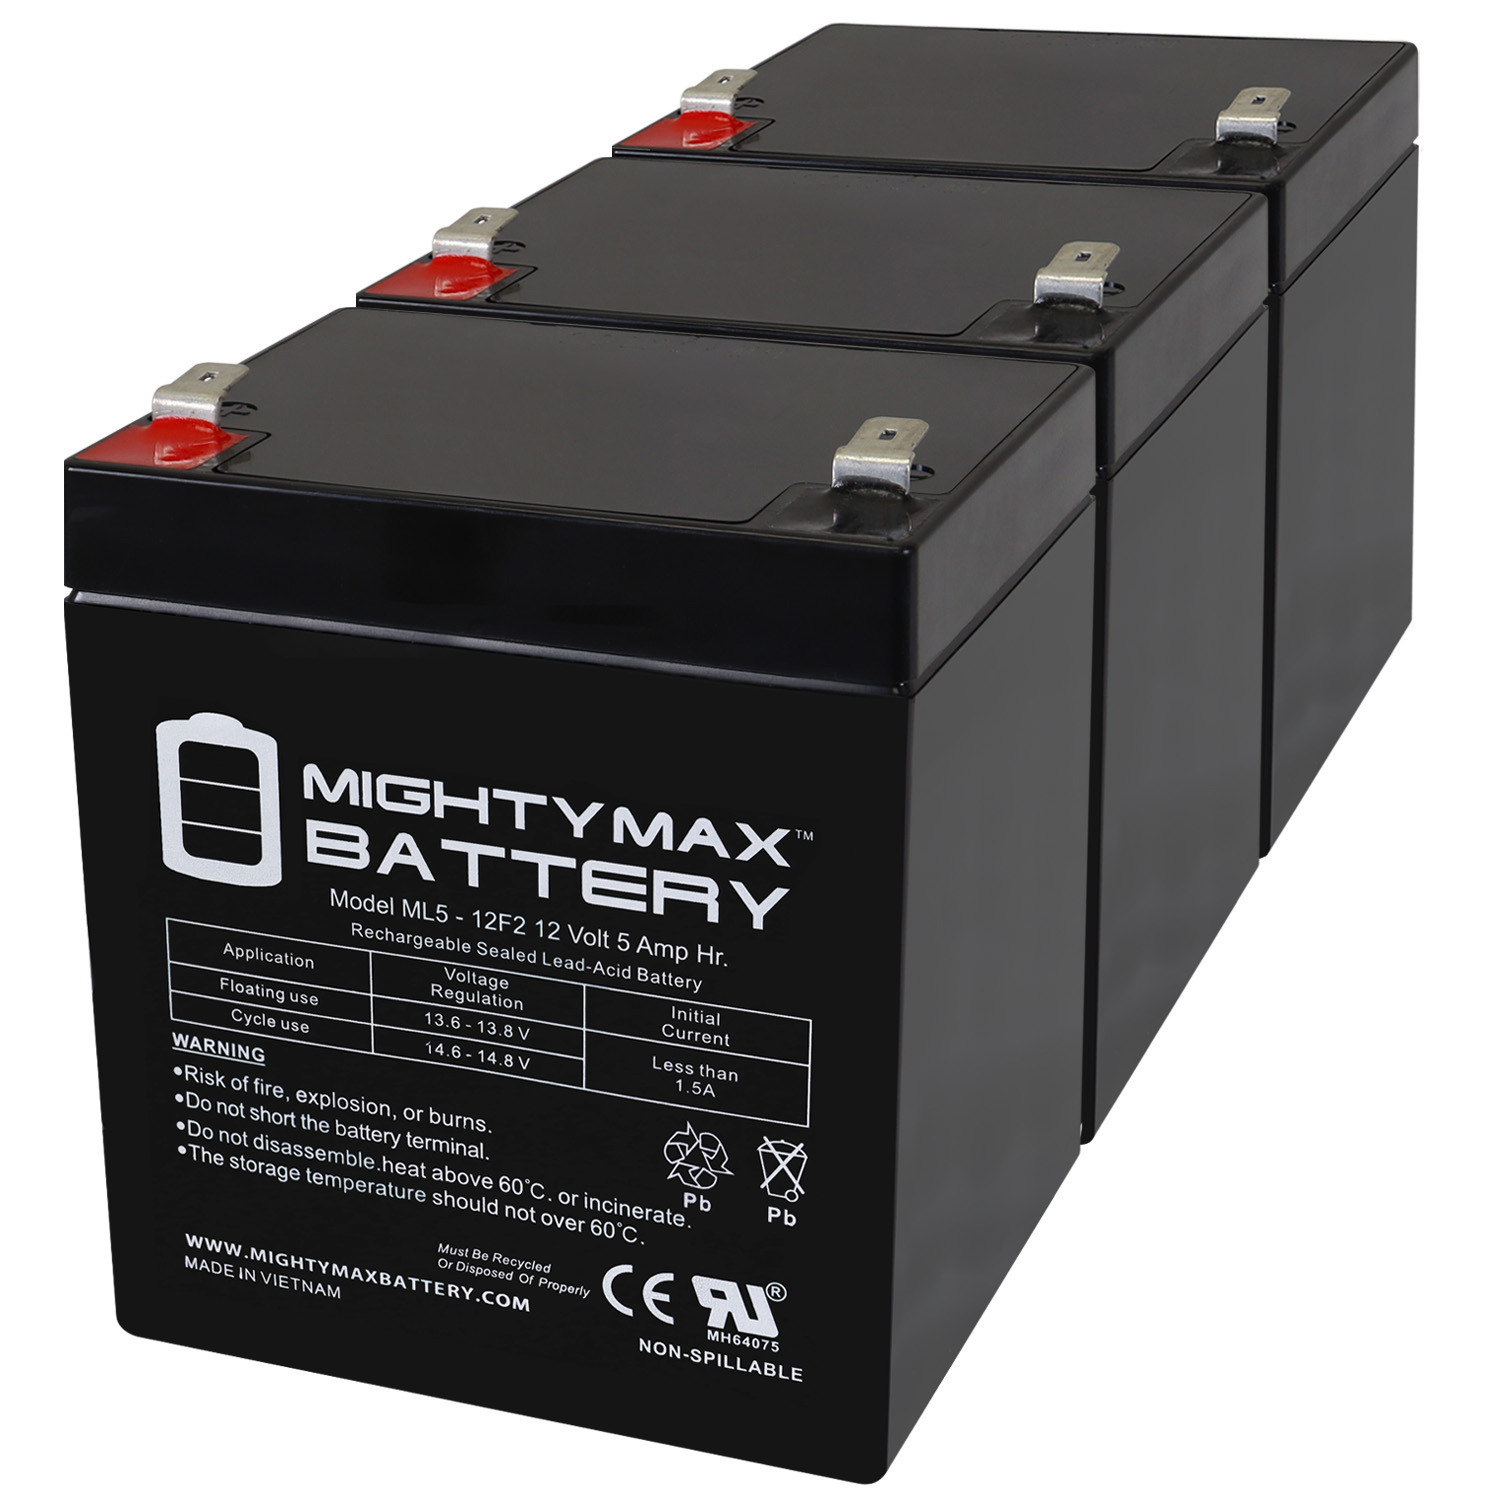 12V 5Ah F2 SLA Replacement Battery for Unisys PW5125 3000e RM - 3 Pack